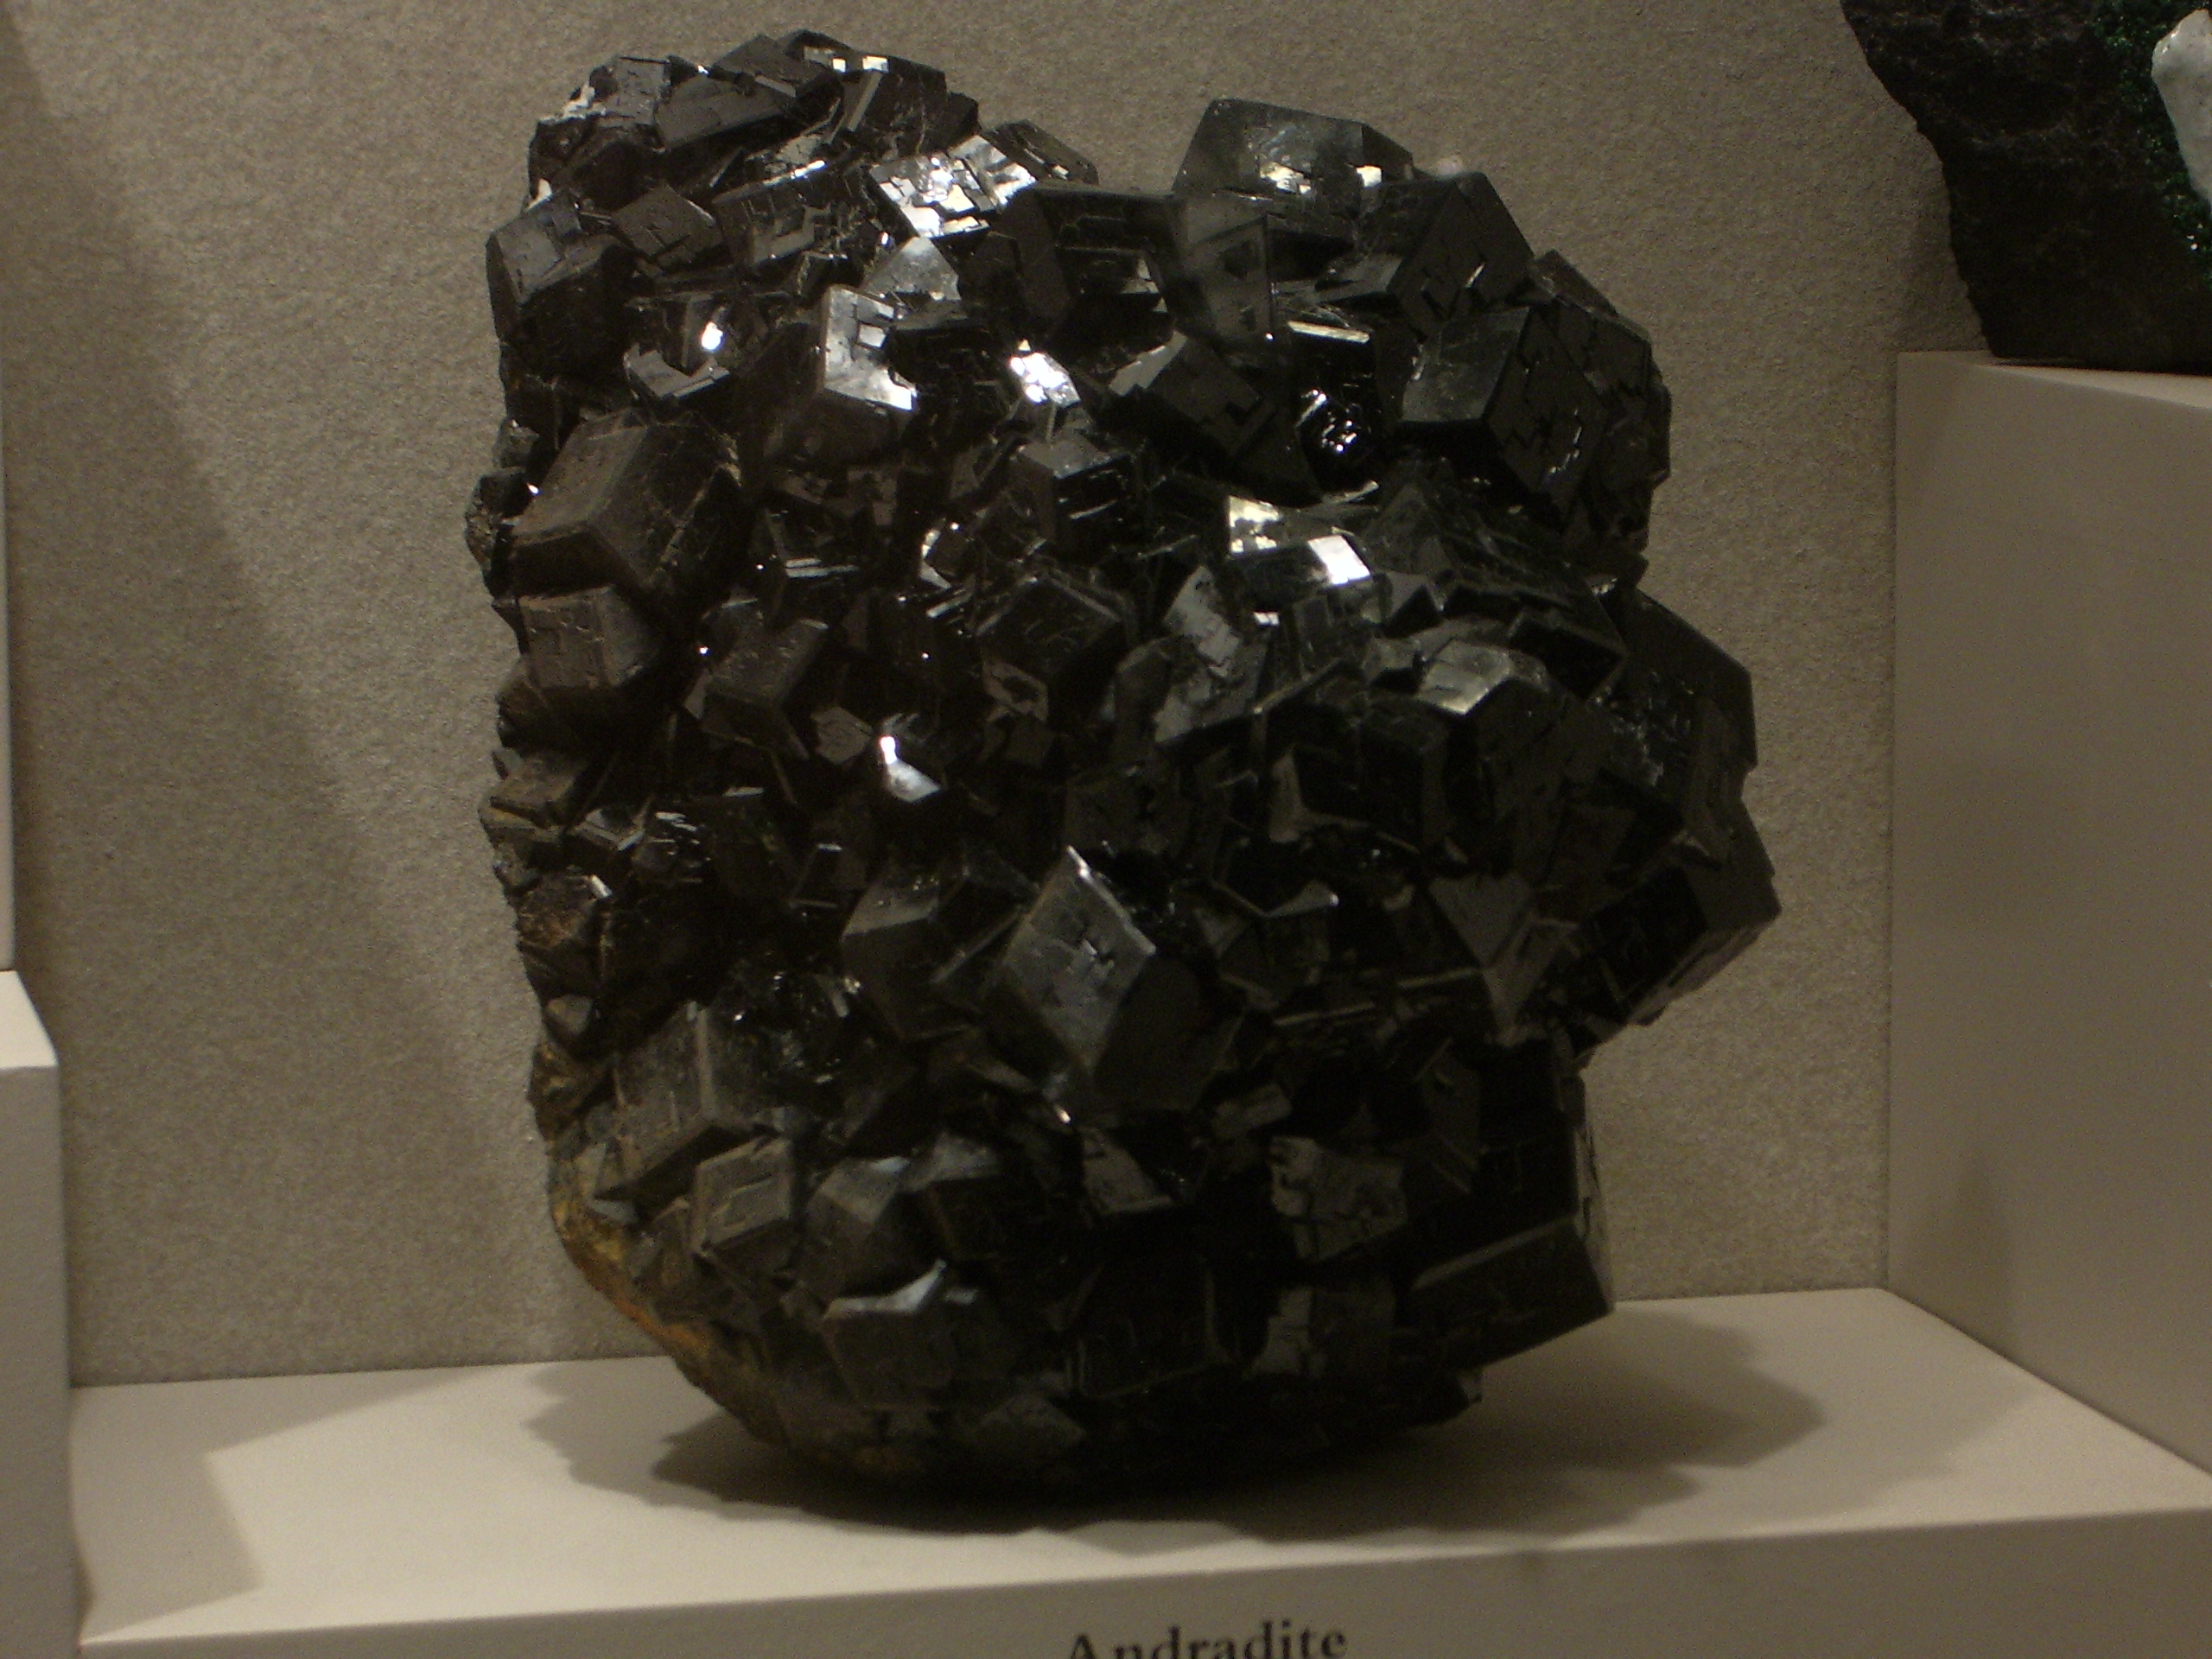 Black Adradite at the Smithsonian Museum of Natural History